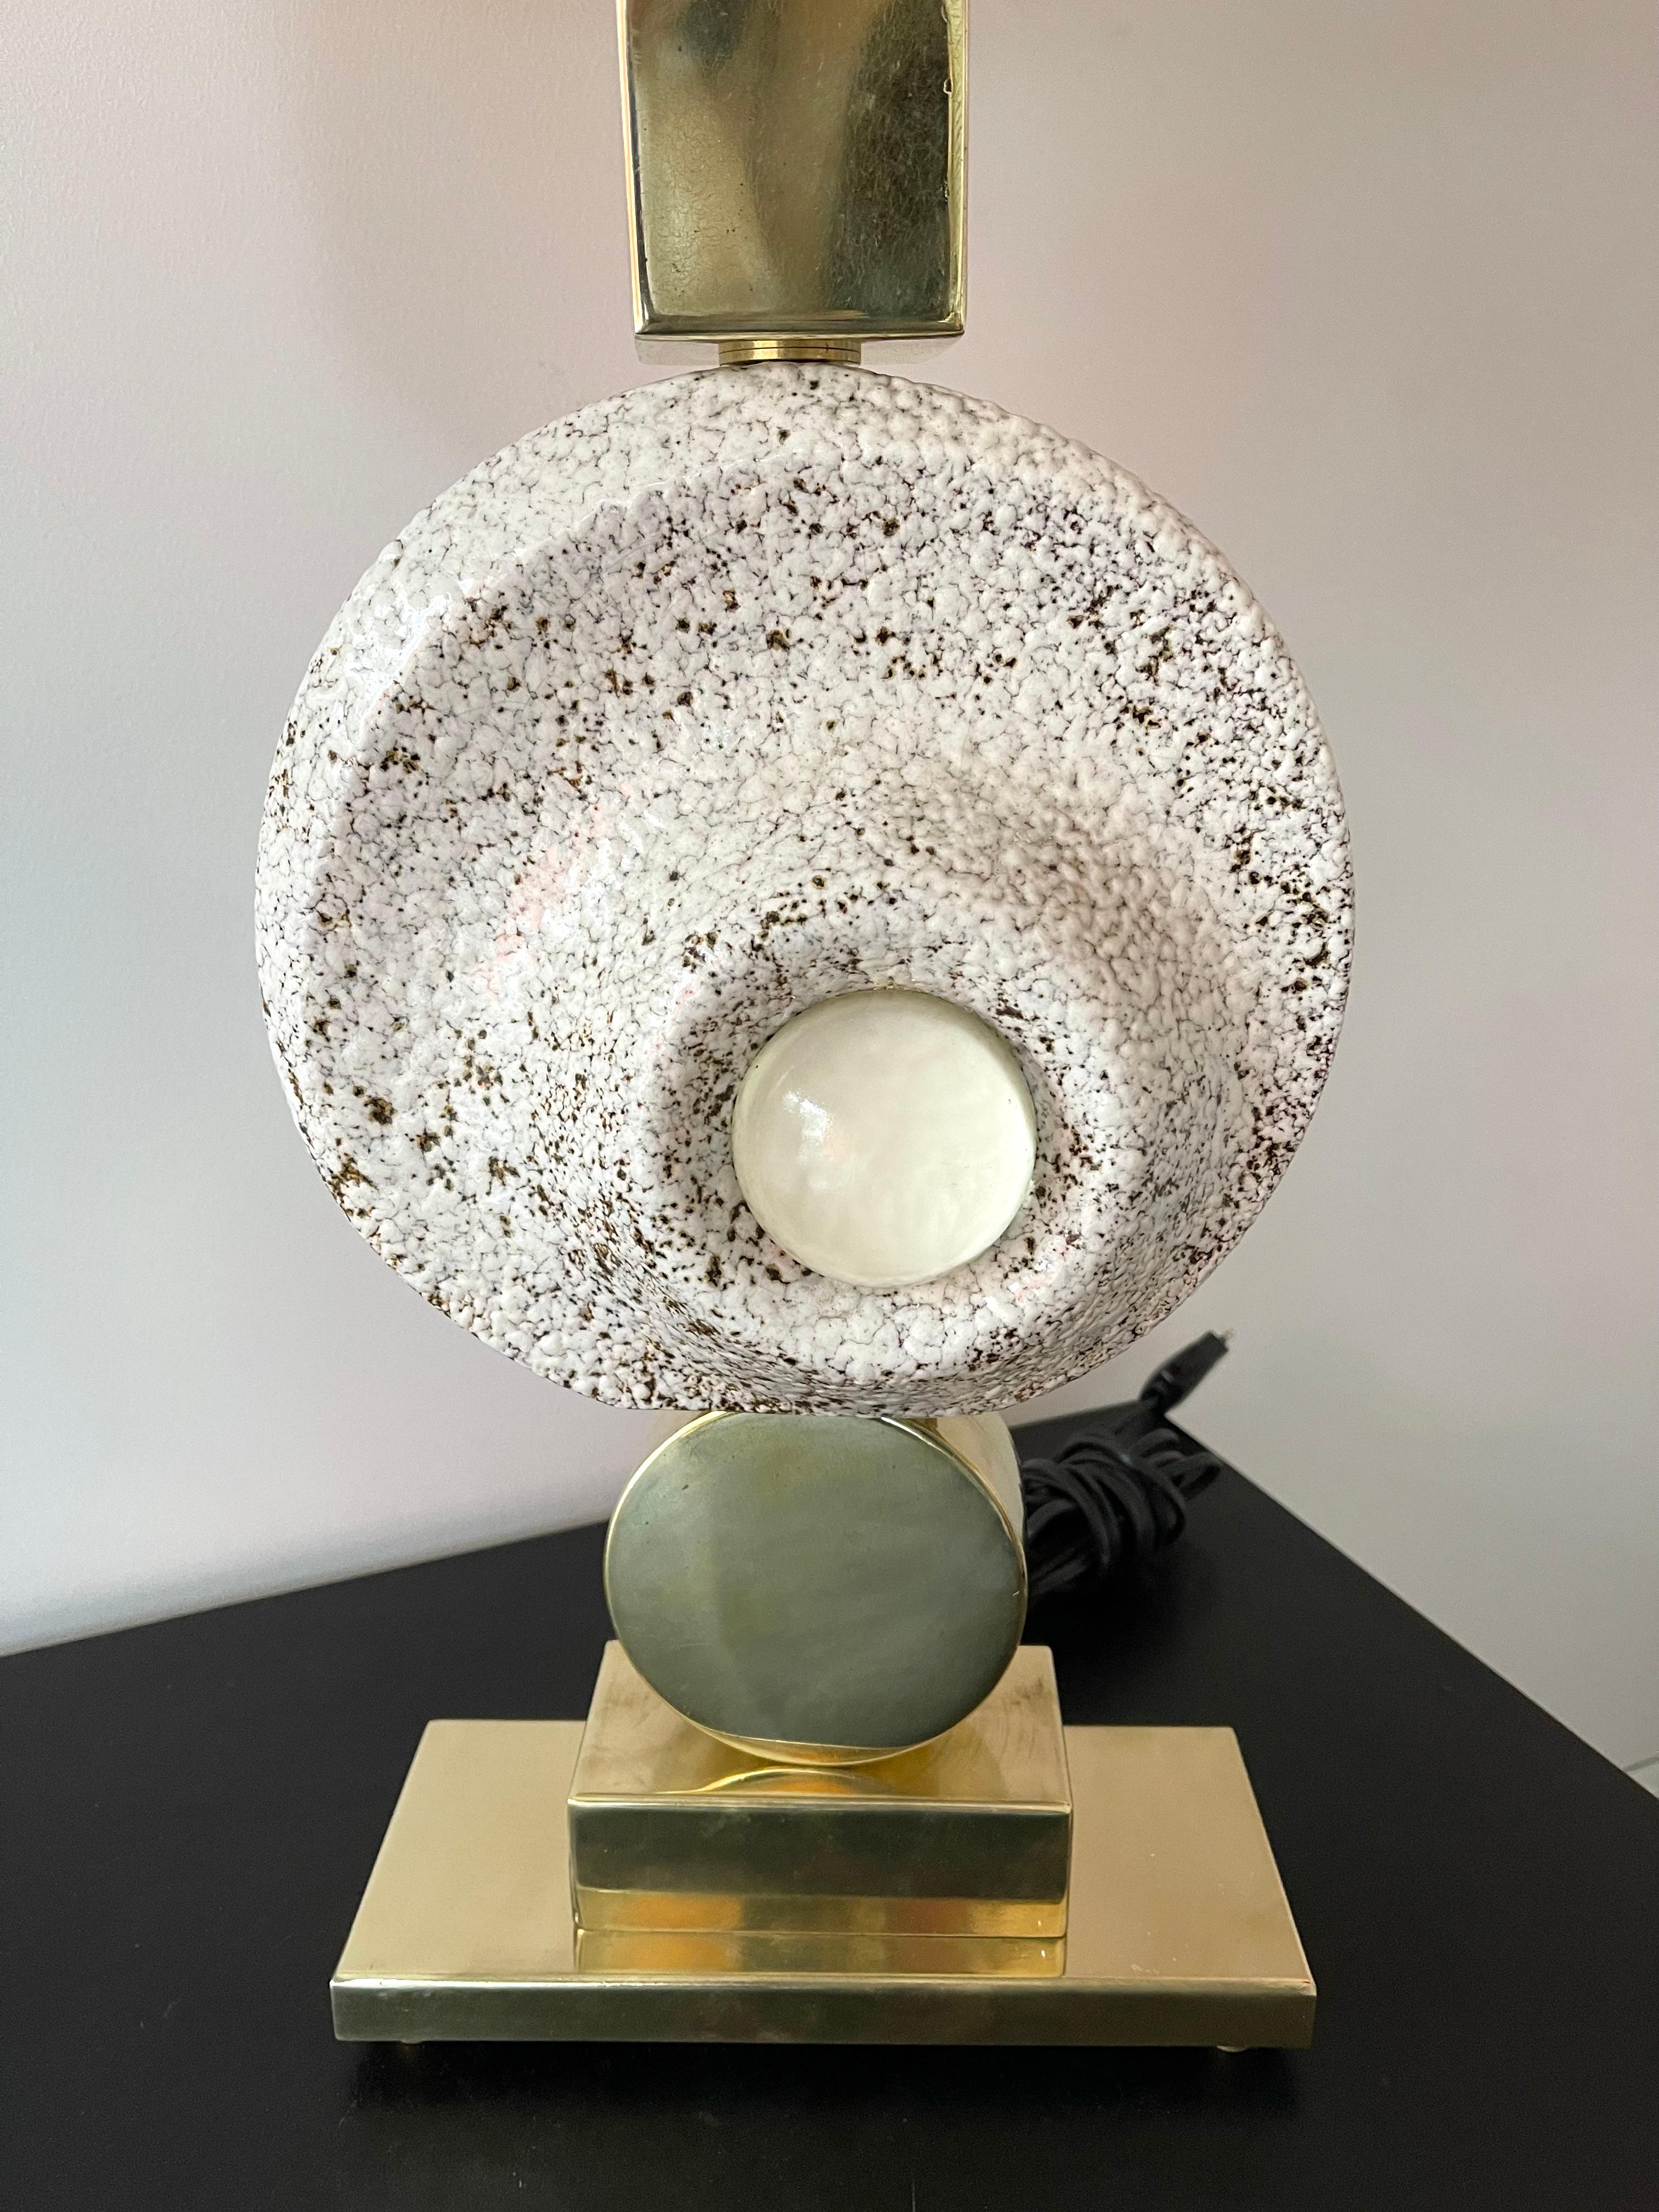 Table or bedside brass, ceramic terracotta and Murano glass eye sculpture lamp. Contemporary work from a small Italian artisanal workshop.

Demo shade non included. Measurements in description with demo shade.
Measurements lamps only H60 x W24 x